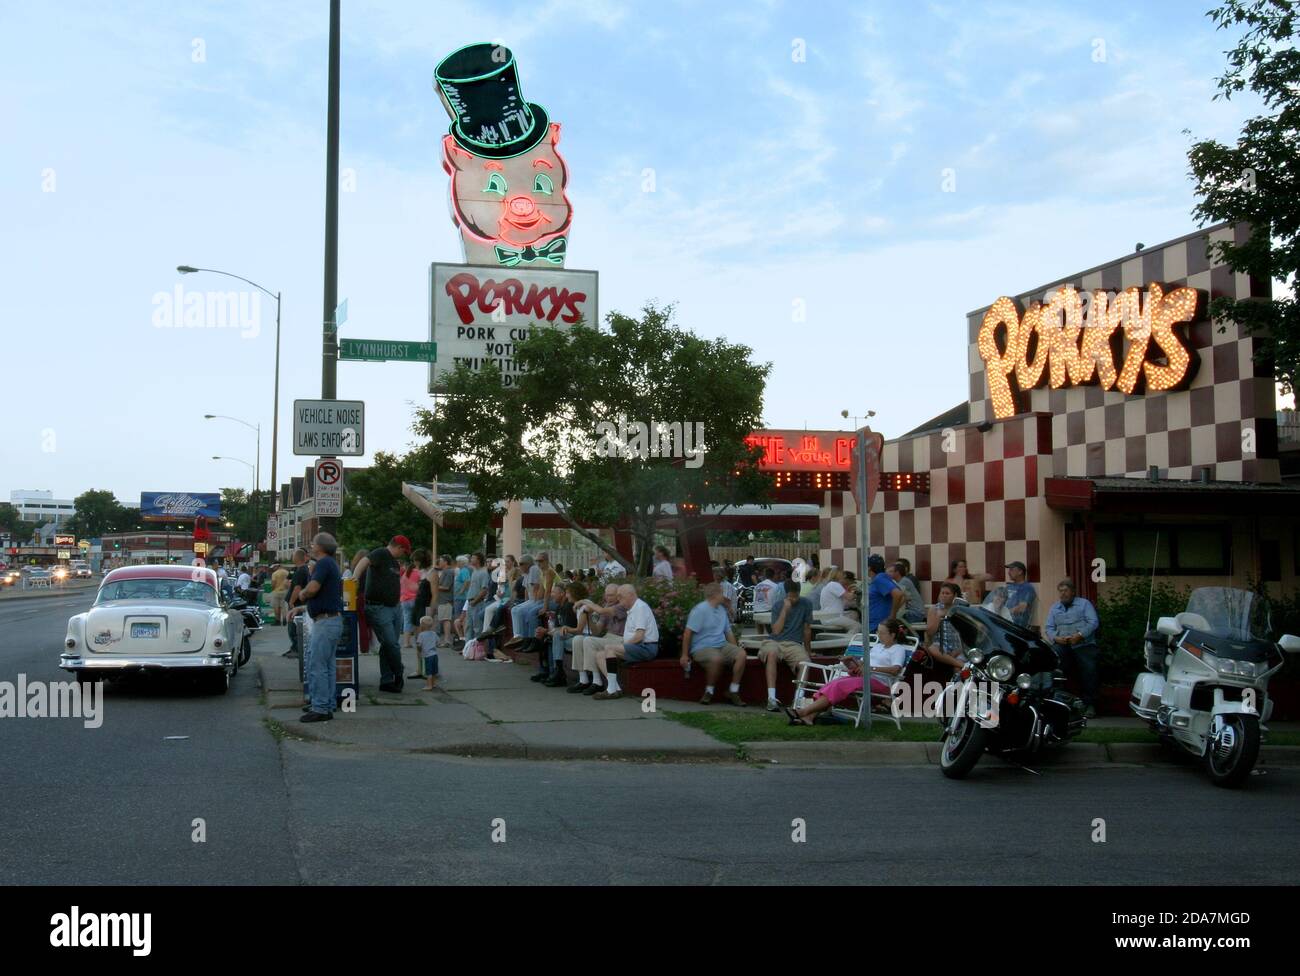 Porkys drive-in restaurant with a neon sign of a pig in a top hat on University Avenue in Saint Paul, Minnesota. Stock Photo